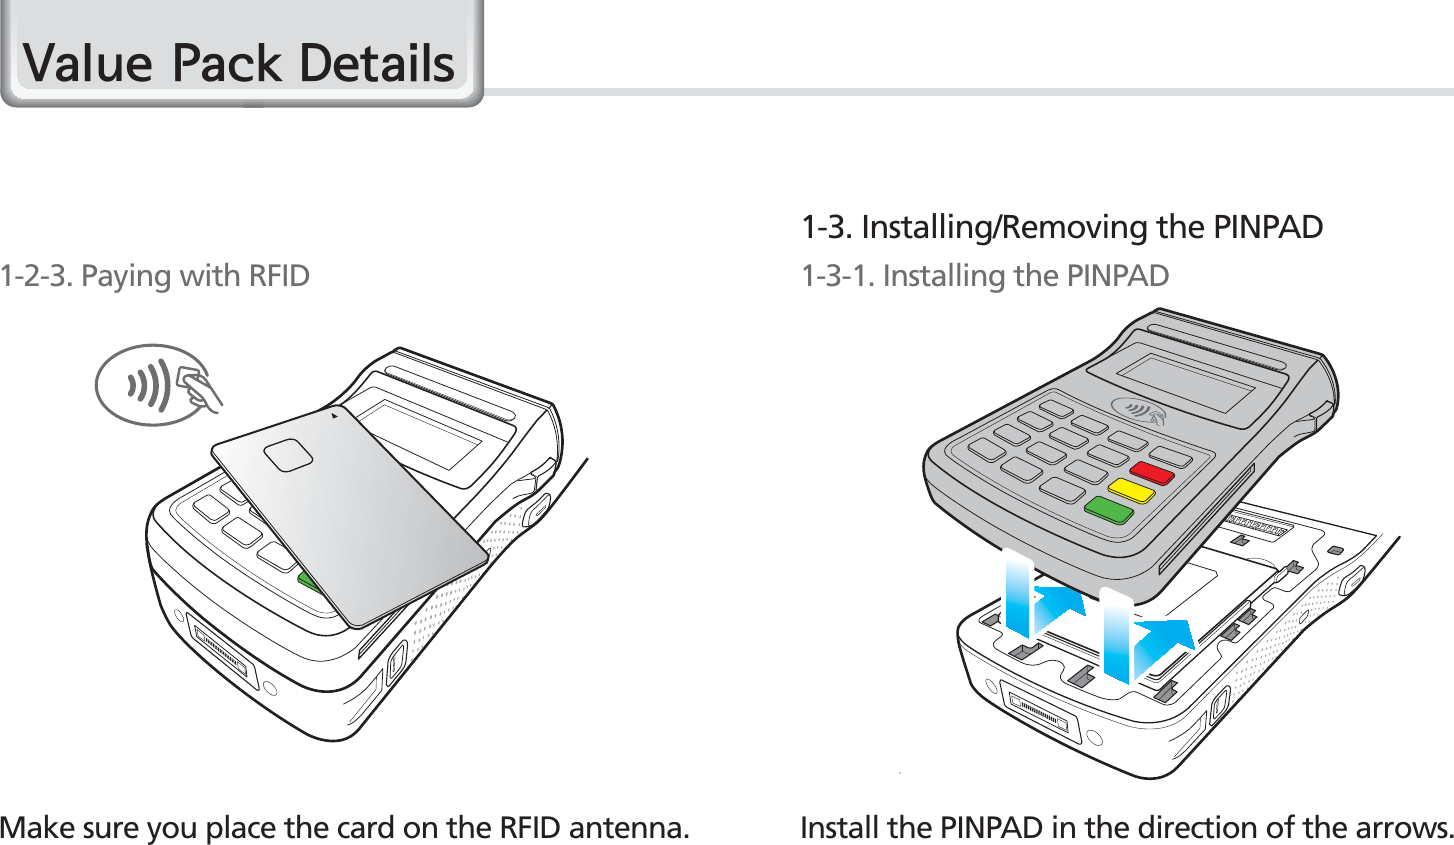 62BIP-1500 ManualInstall the PINPAD in the direction of the arrows.Make sure you place the card on the RFID antenna.1-2-3. Paying with RFID1-3. Installing/Removing the PINPAD1-3-1. Installing the PINPAD9DOXH3DFN&apos;HWDLOV